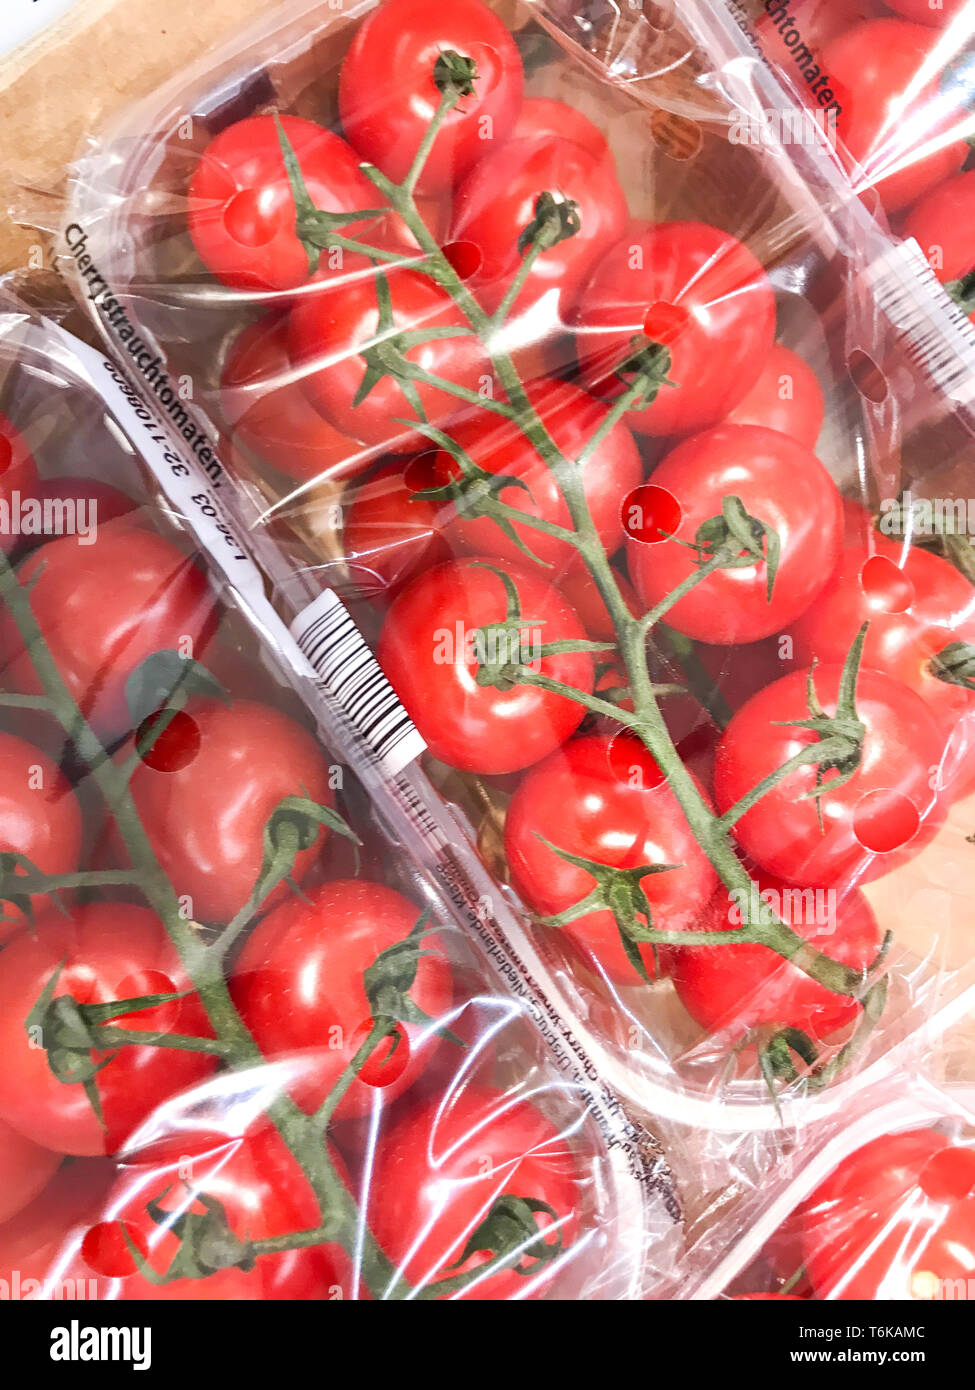 - Stock in Alamy the supermarket tomatoes Photo Red cherry